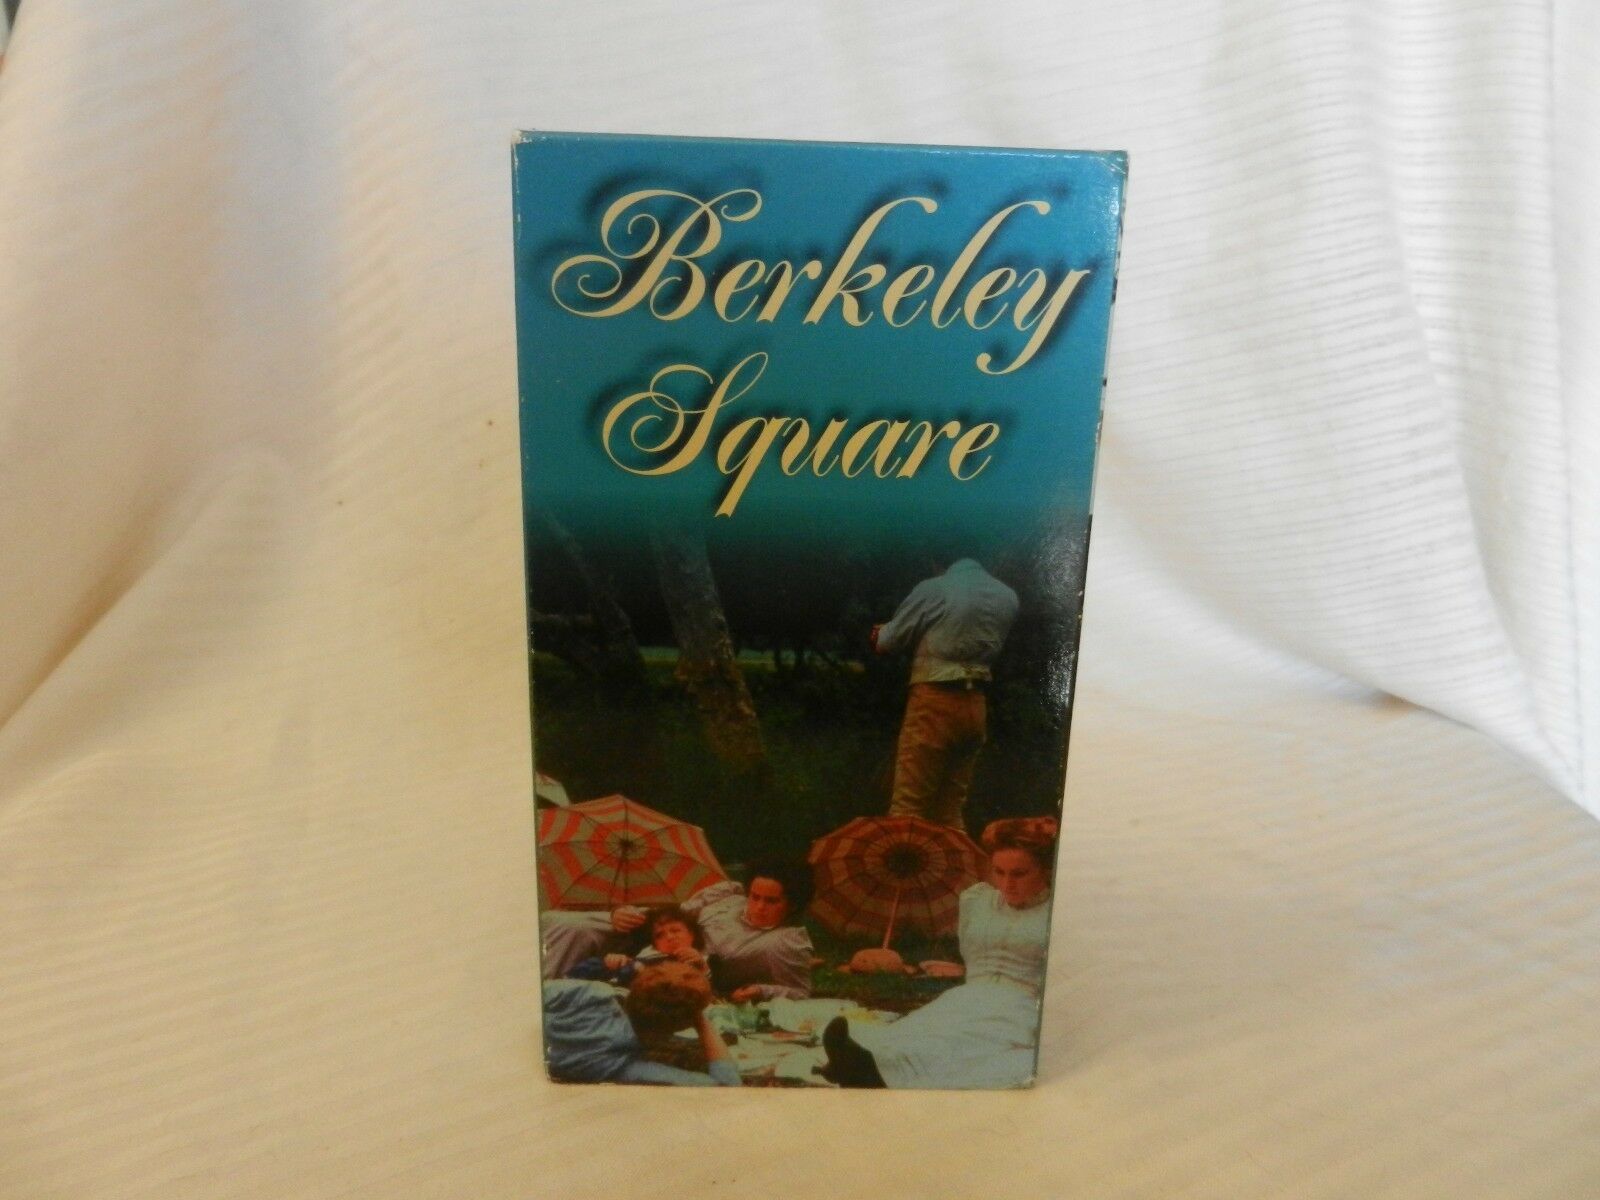 Primary image for Berkeley Square VHS 1998 Part 1 Episode 1 & Episode 2